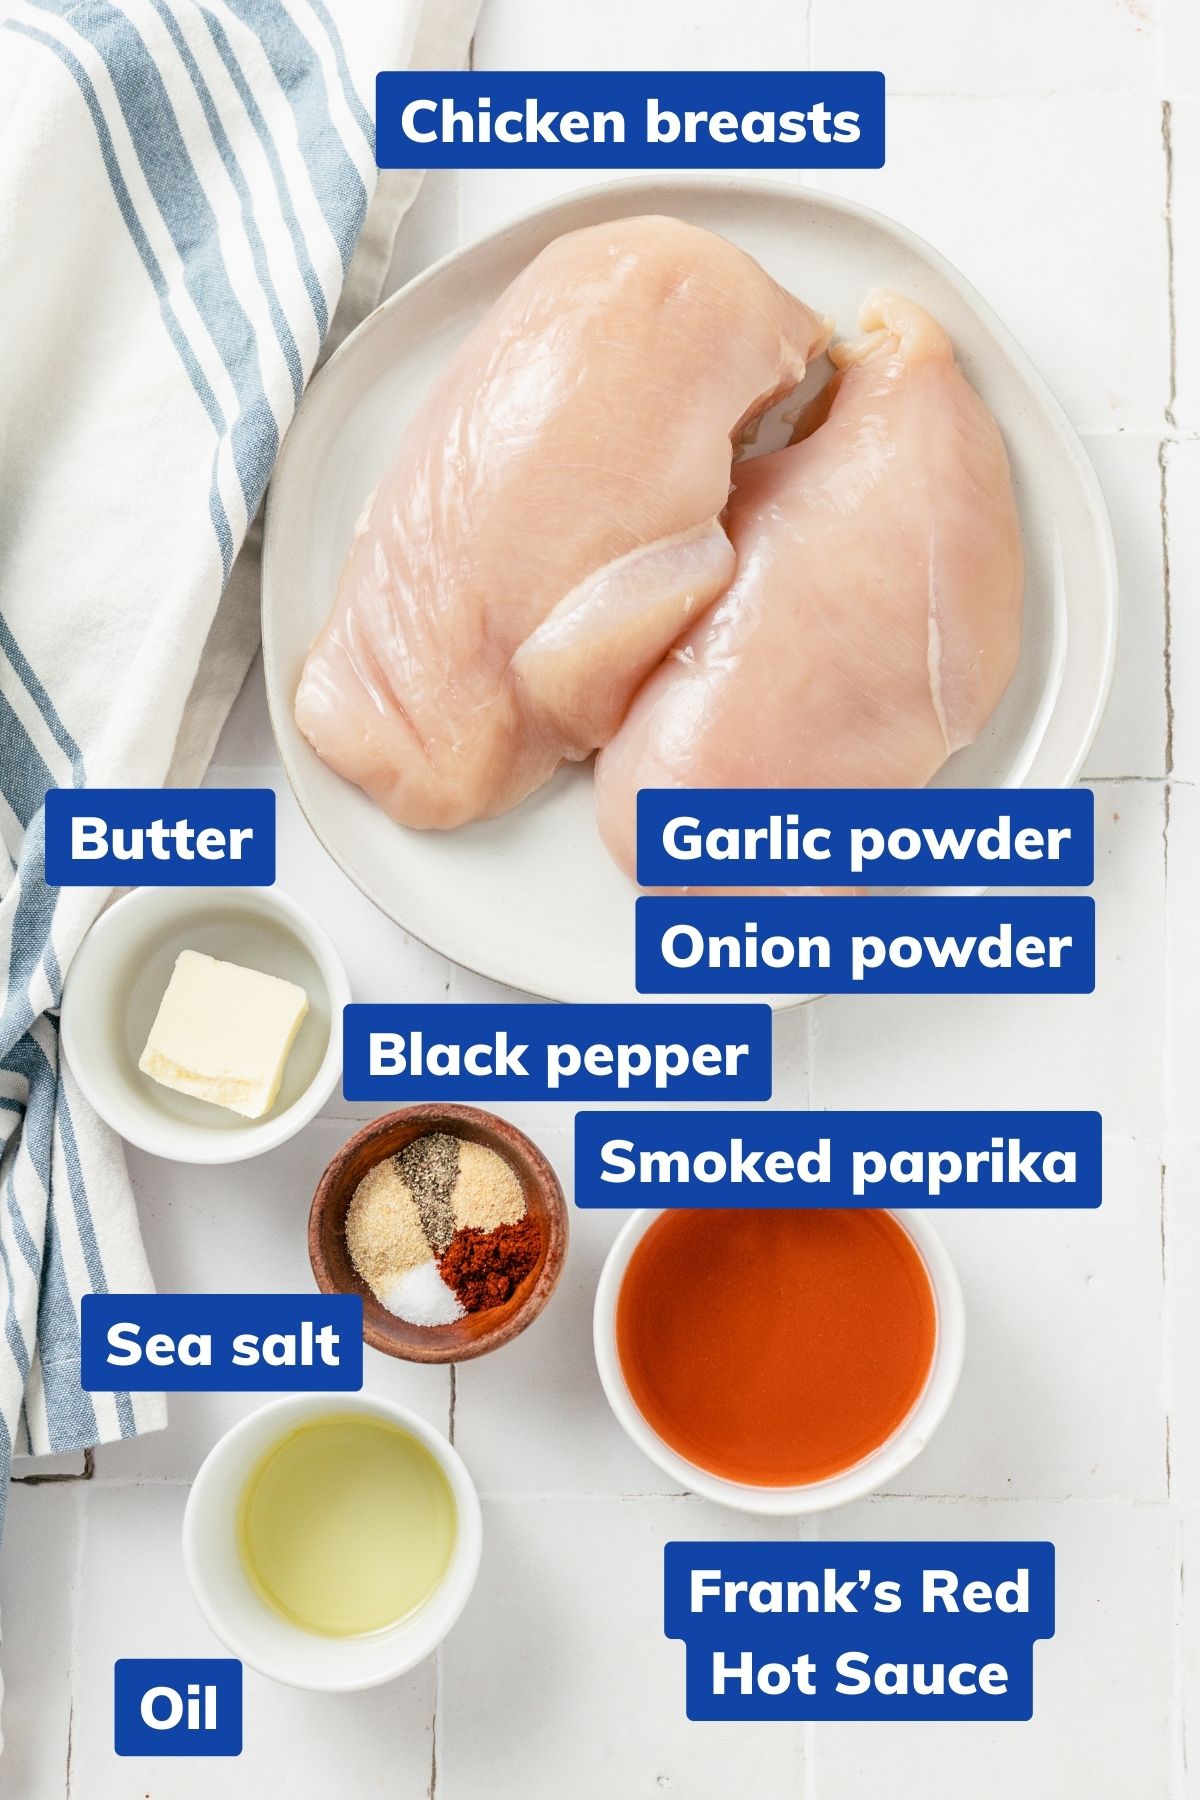 ingredients needed to make air fryer buffalo chicken breasts: chicken breasts, butter, garlic powder, onion powder, black pepper, smoked paprika, sea salt, oil, and hot sauce on separate bowls